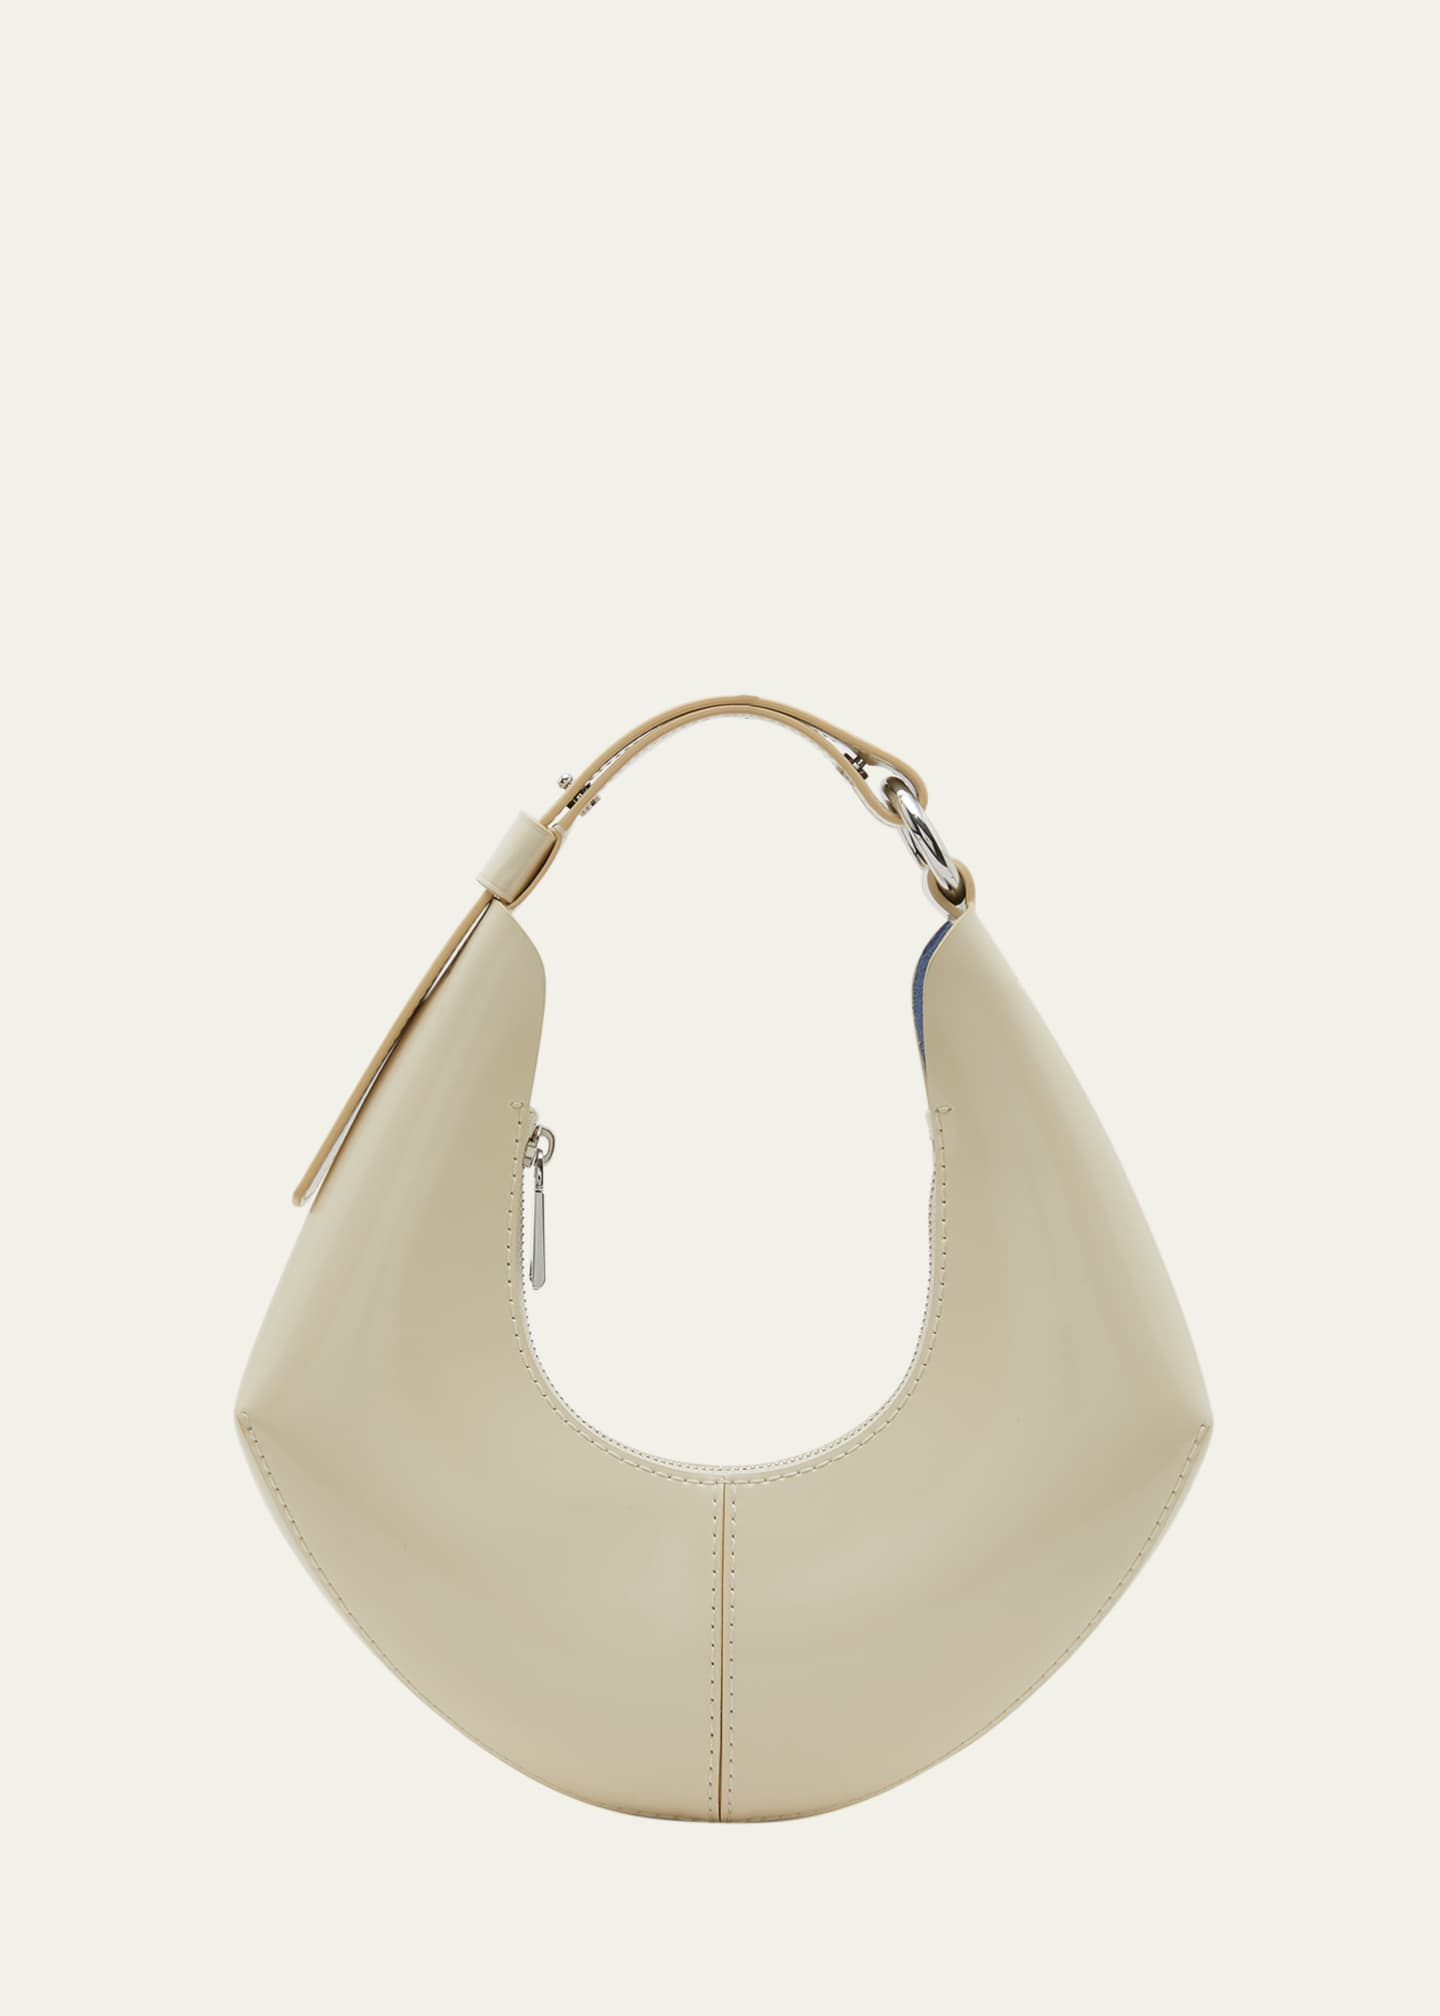 Proenza Schouler White Label Chrystie Small Leather Top-Handle Bag ...